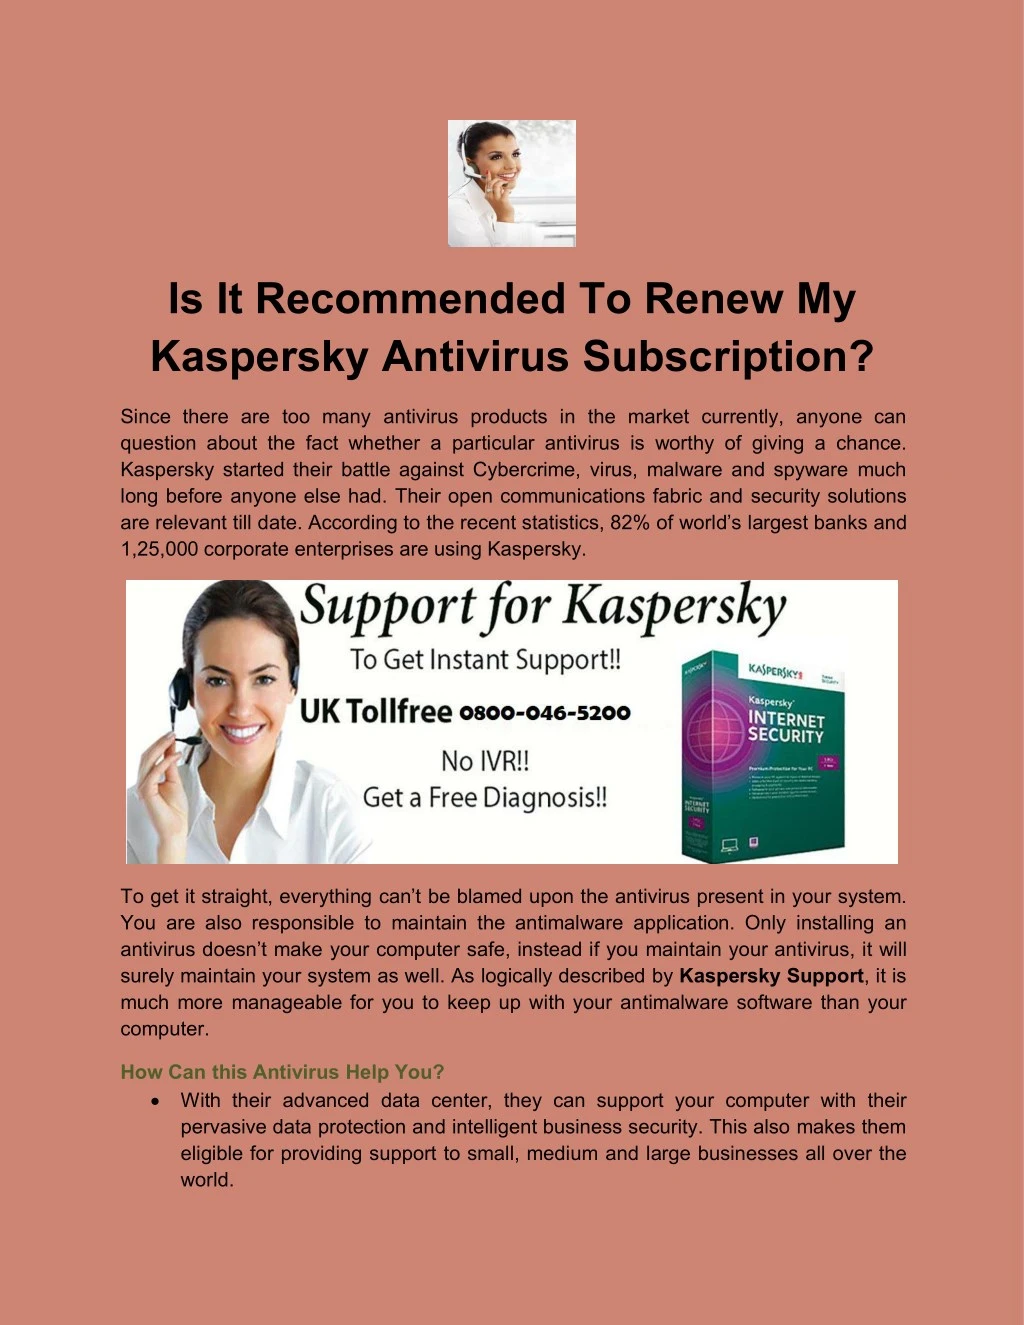 is it recommended to renew my kaspersky antivirus